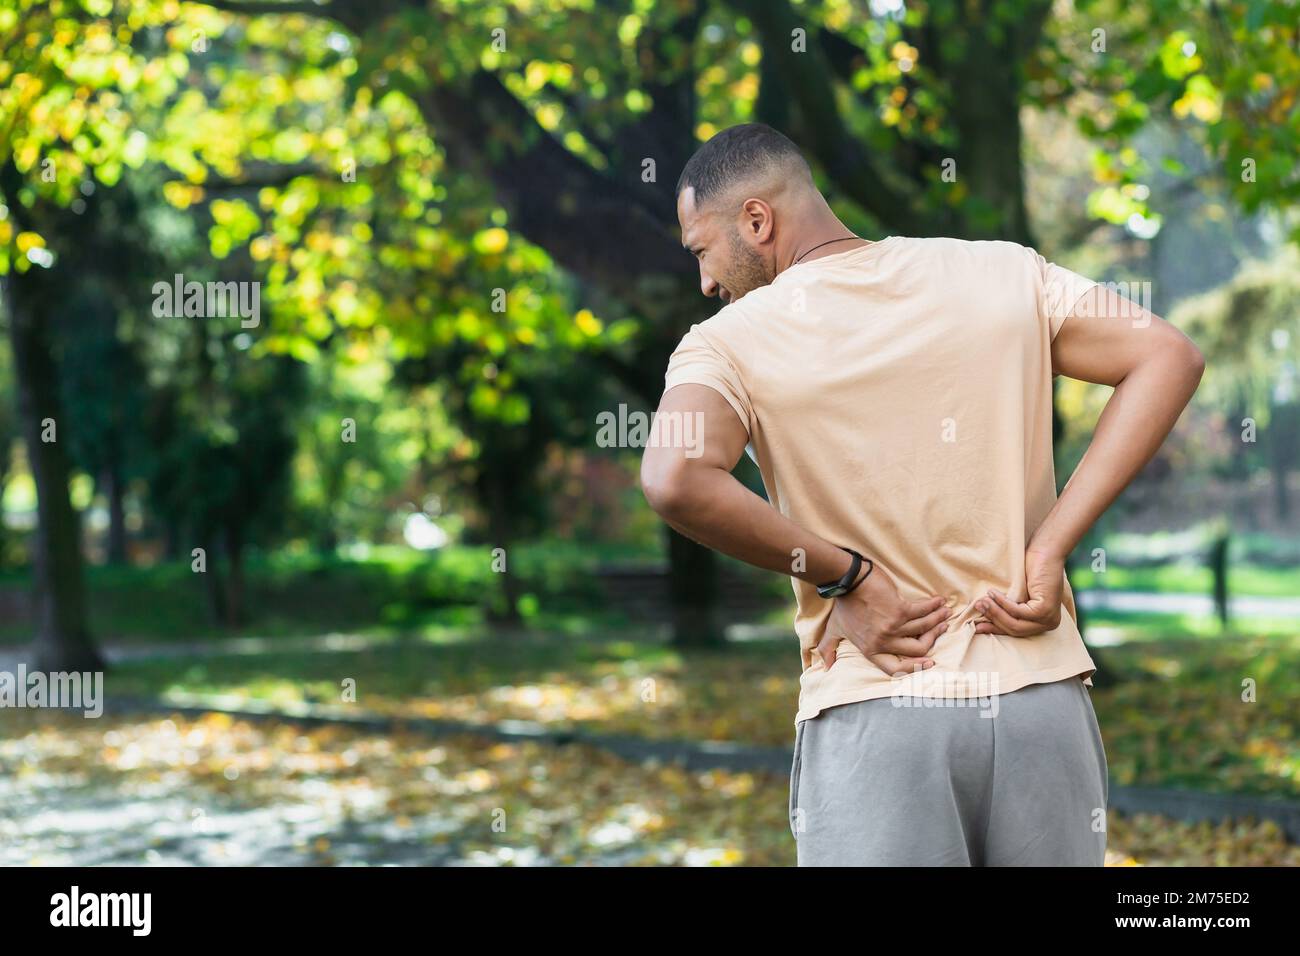 Tired man after jogging in park, hispanic man has severe pain in back and muscles after fitness, massaging his side with hand near trees. Stock Photo